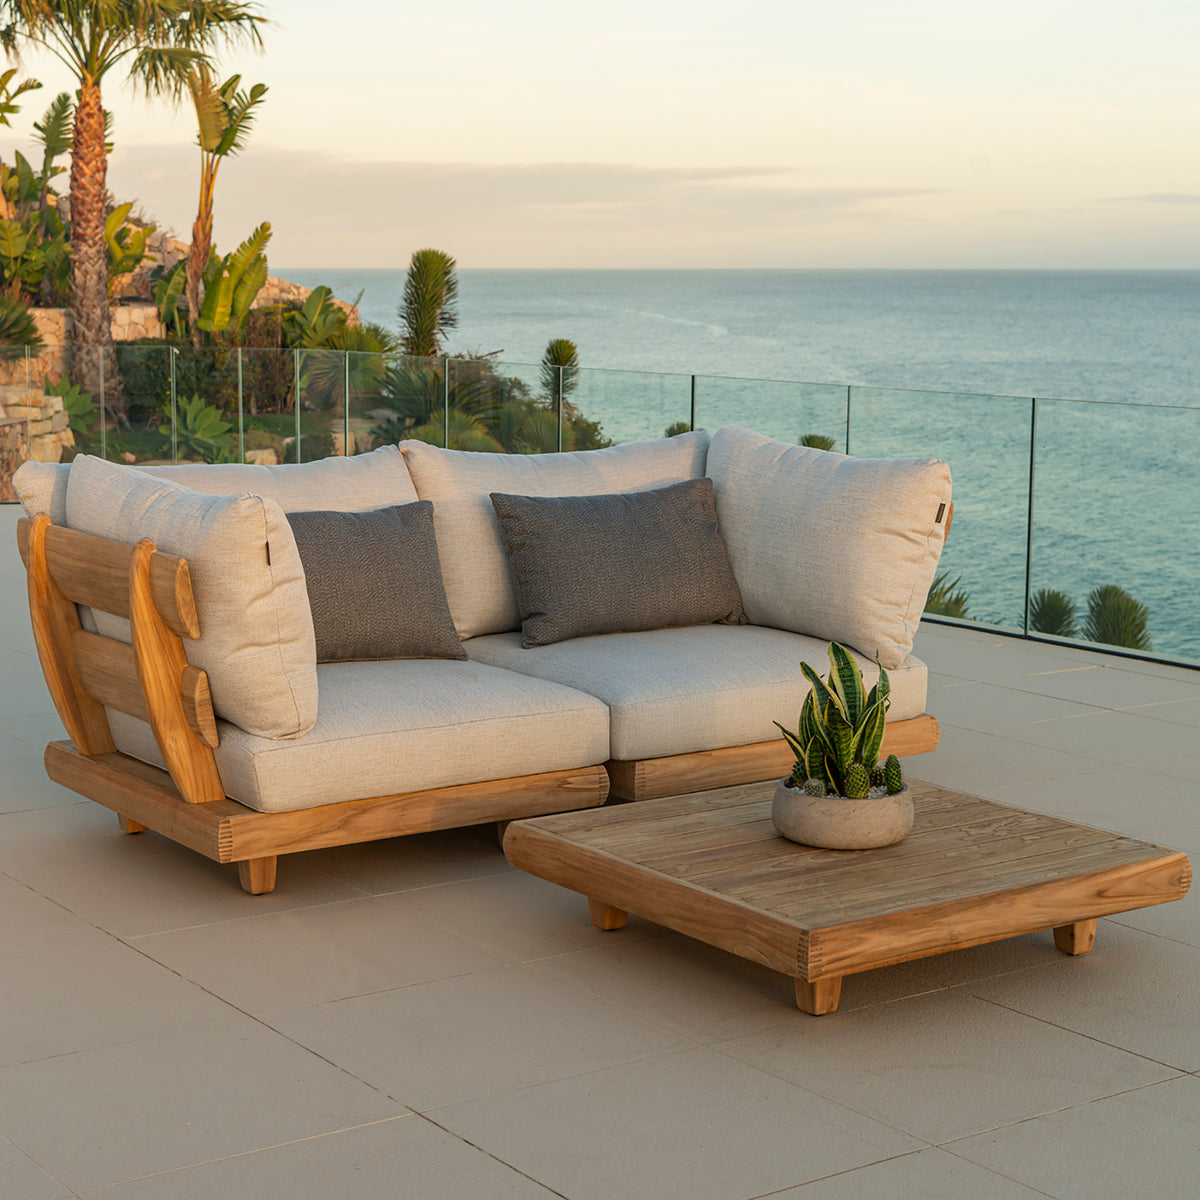 Alexander Rose Outdoor Sorrento Teak Lounge Sofa with Cushion and Coffee Table